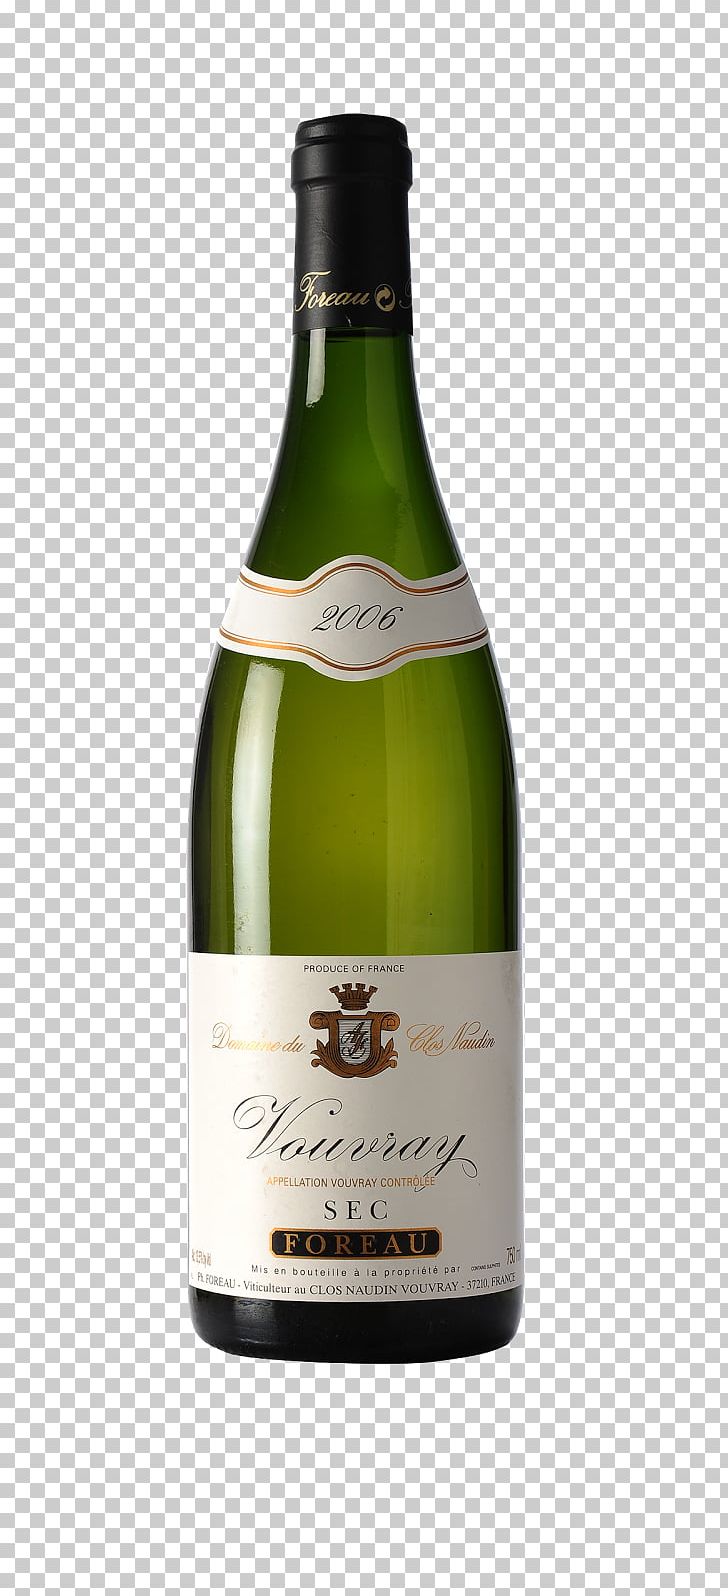 Champagne White Wine Bottle PNG, Clipart, Alcoholic Beverage, Bottle, Champagne, Drink, Food Drinks Free PNG Download